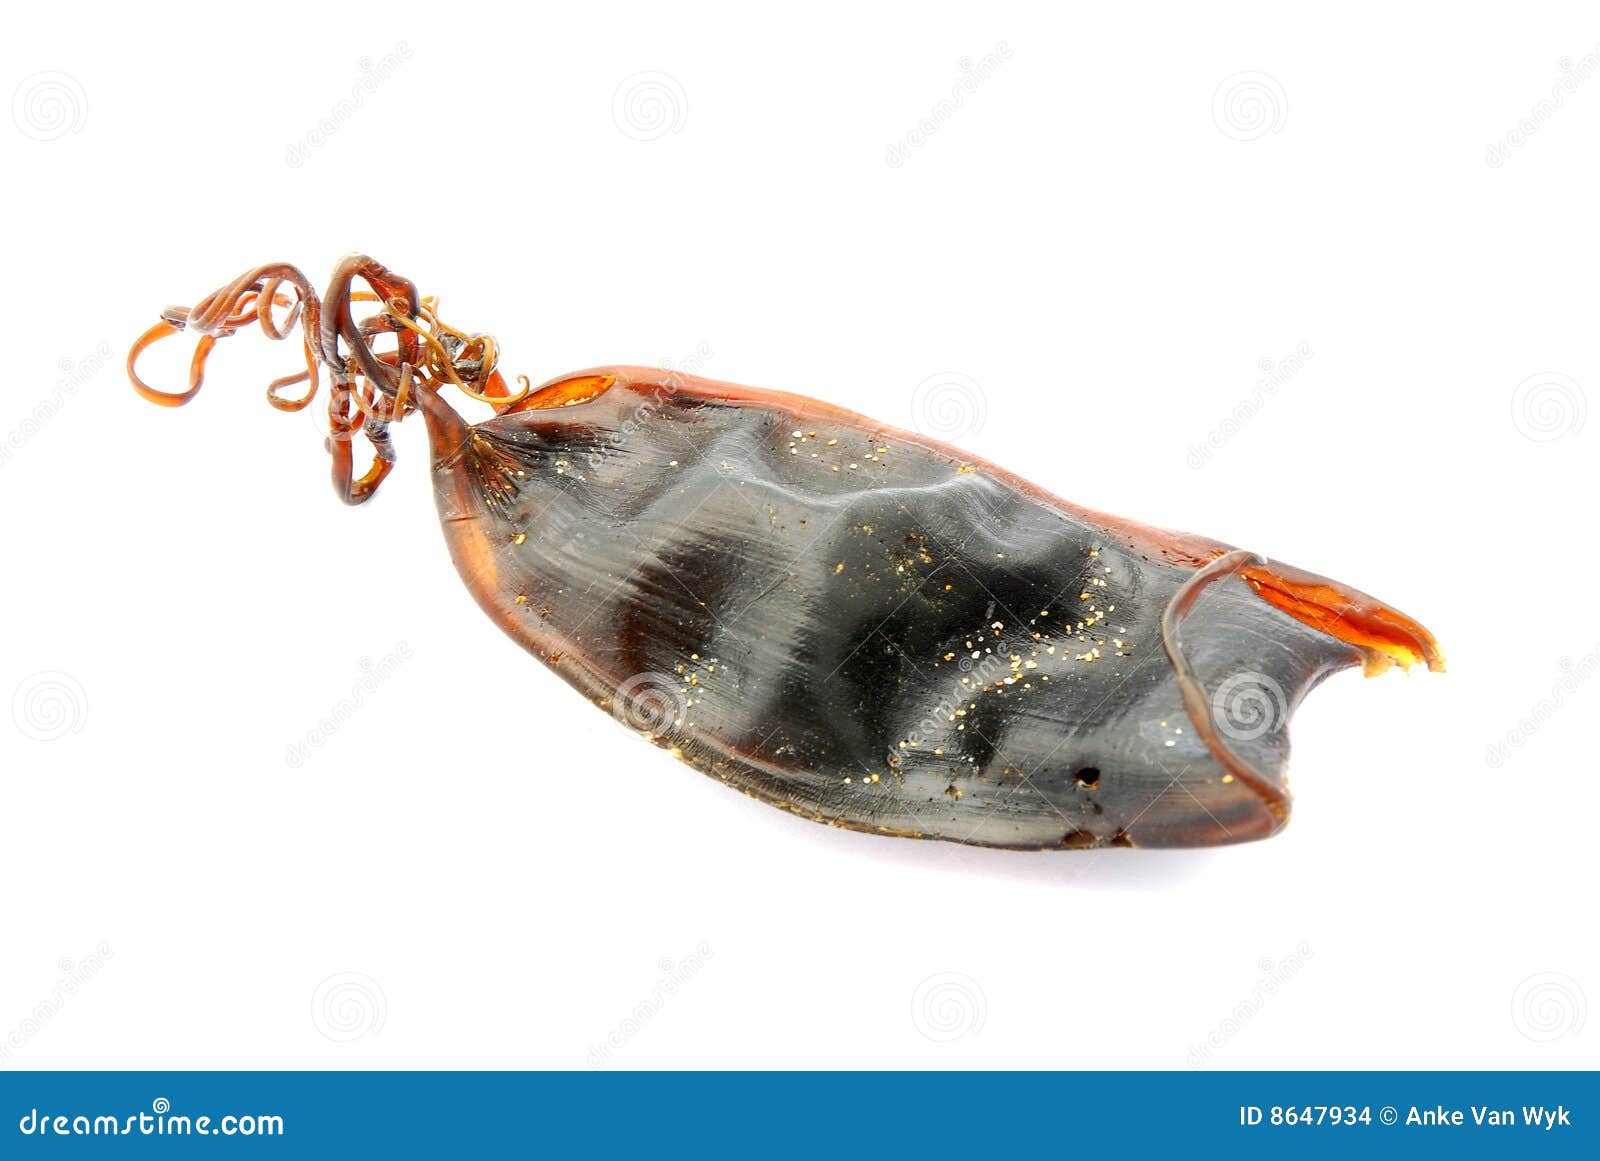 A mermaid's purse, an egg case for a ray, is found washed on the shore near  the boardwalk in Virginia Beach, Virginia, United States Stock Photo - Alamy